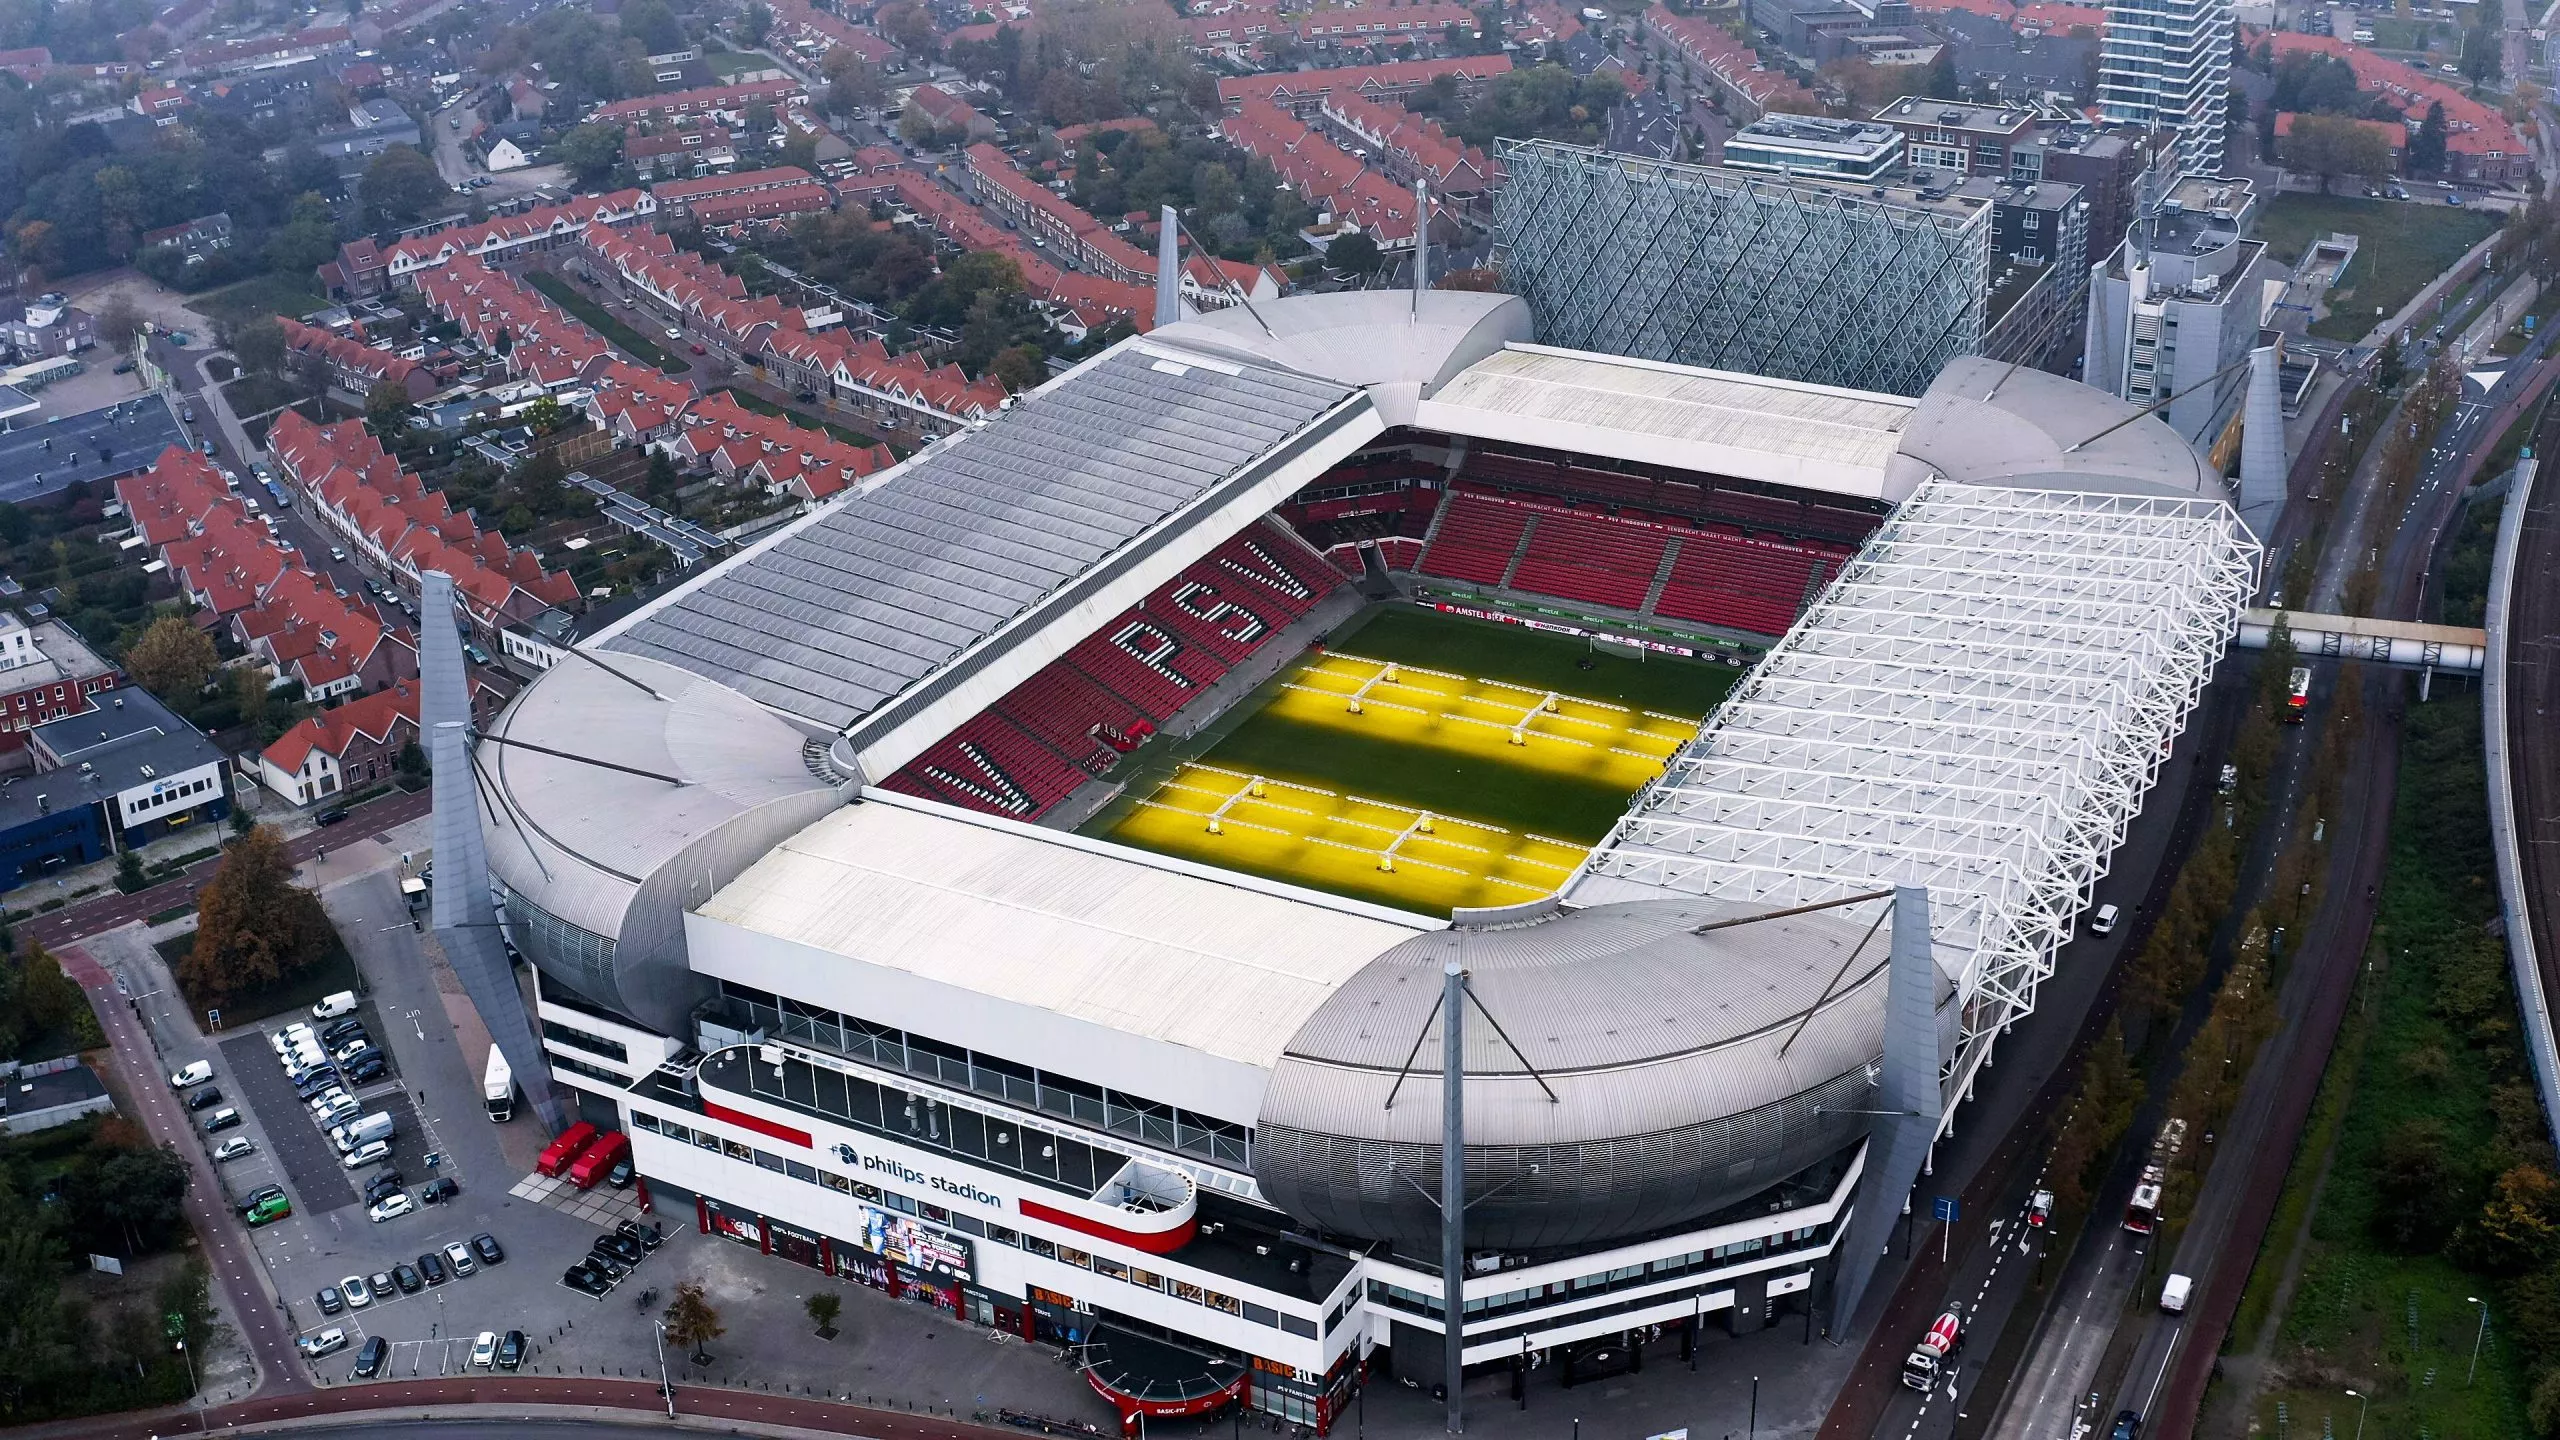 Philips Stadium is a football stadium in Eindhoven, Netherlands, and it is the home of PSV, also known as PSV Eindhoven in Dutch Eredivisie league